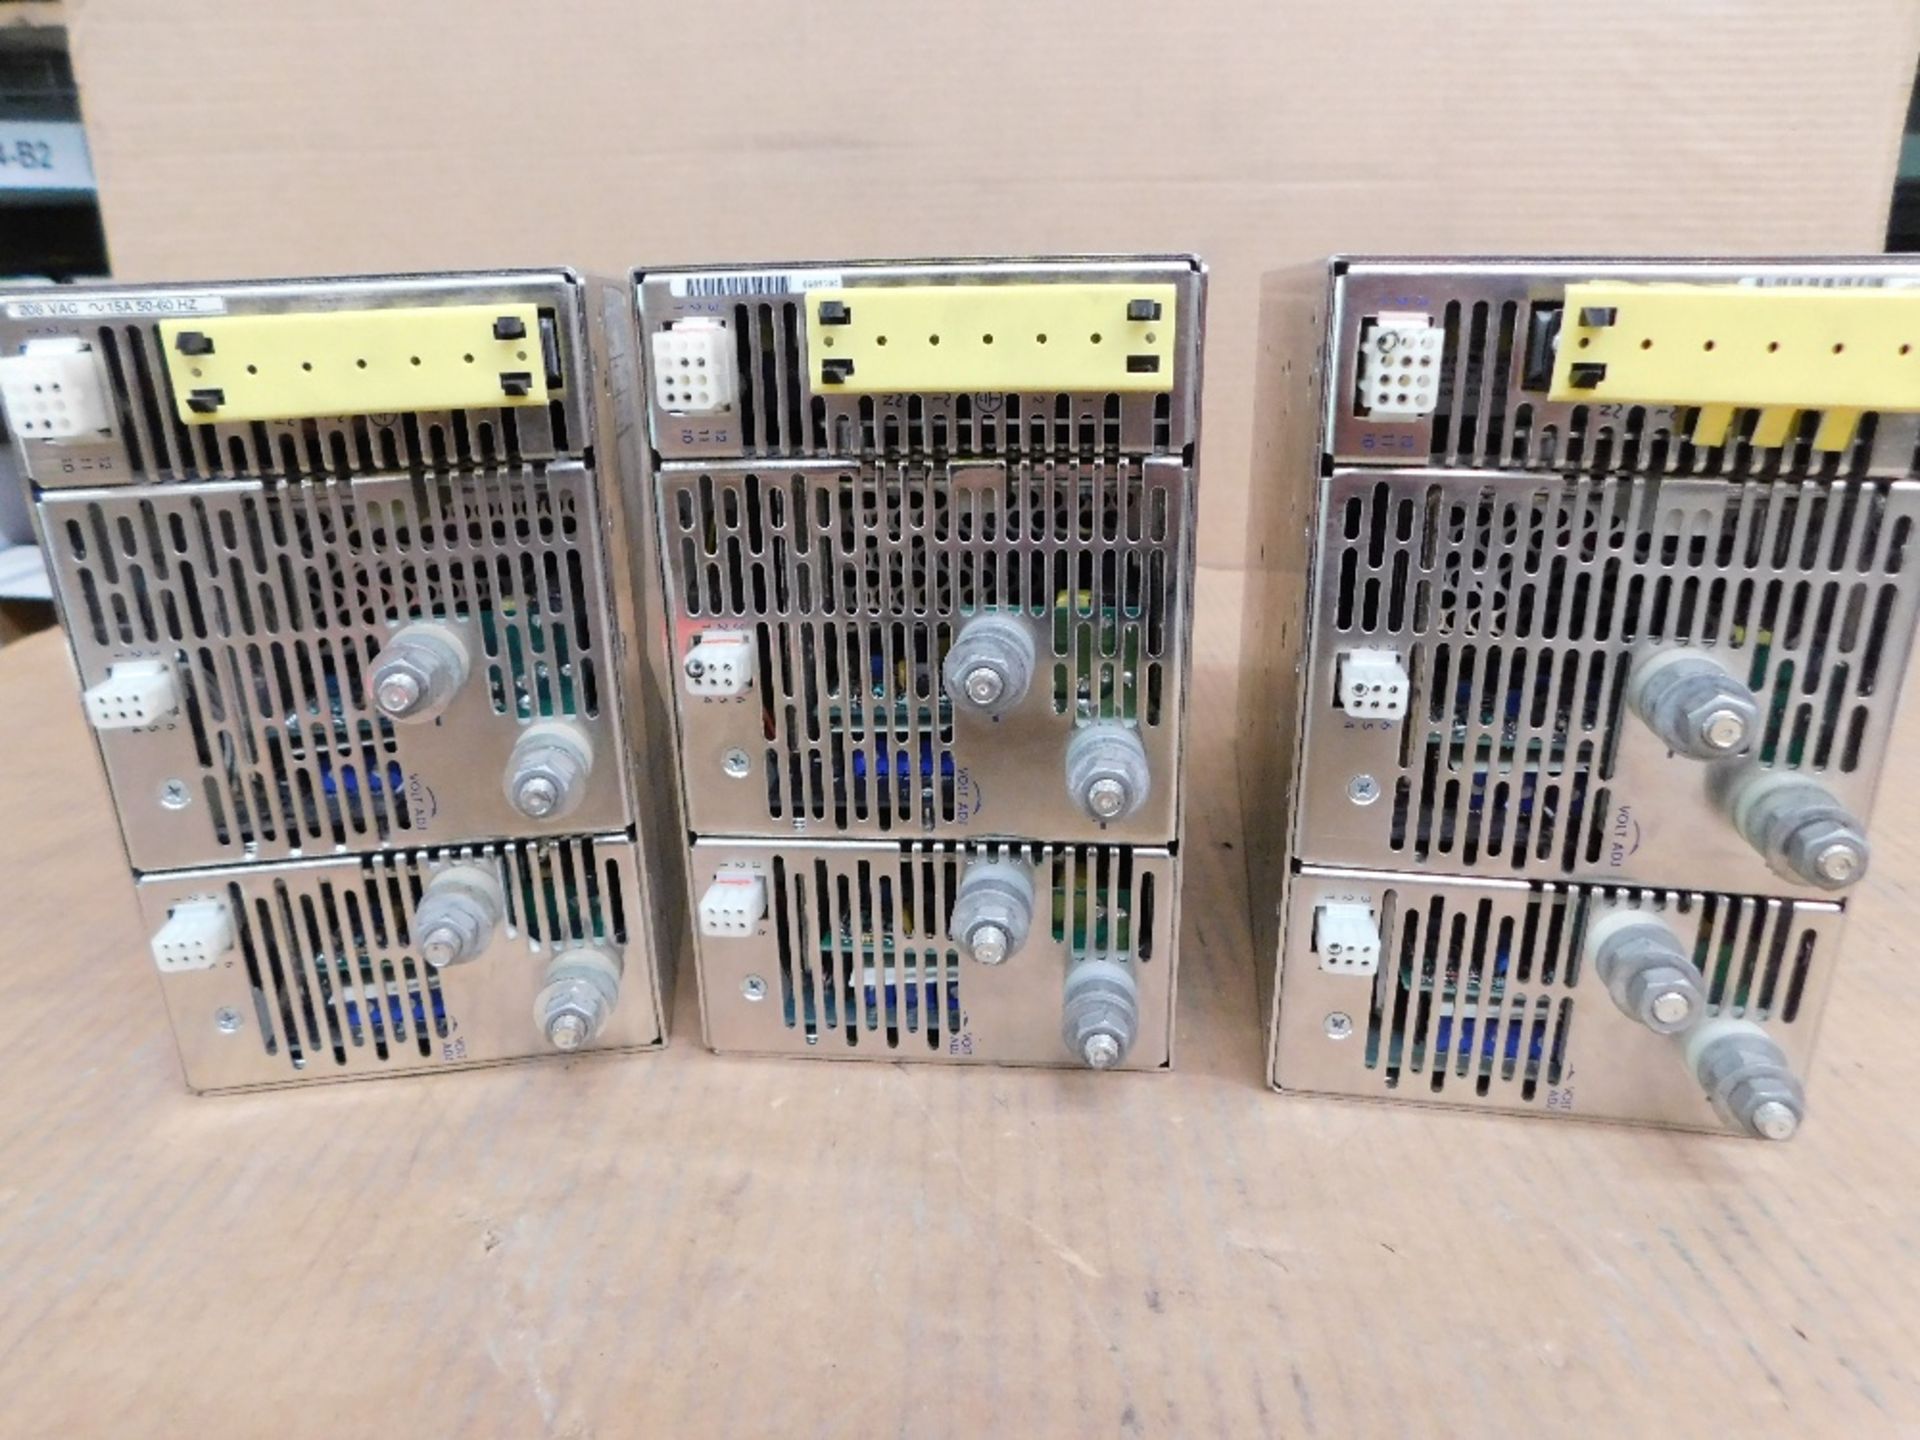 3x Power One New No Box Surplus SF-435442 Other Power Supplies 200A 5VDC - Image 2 of 8